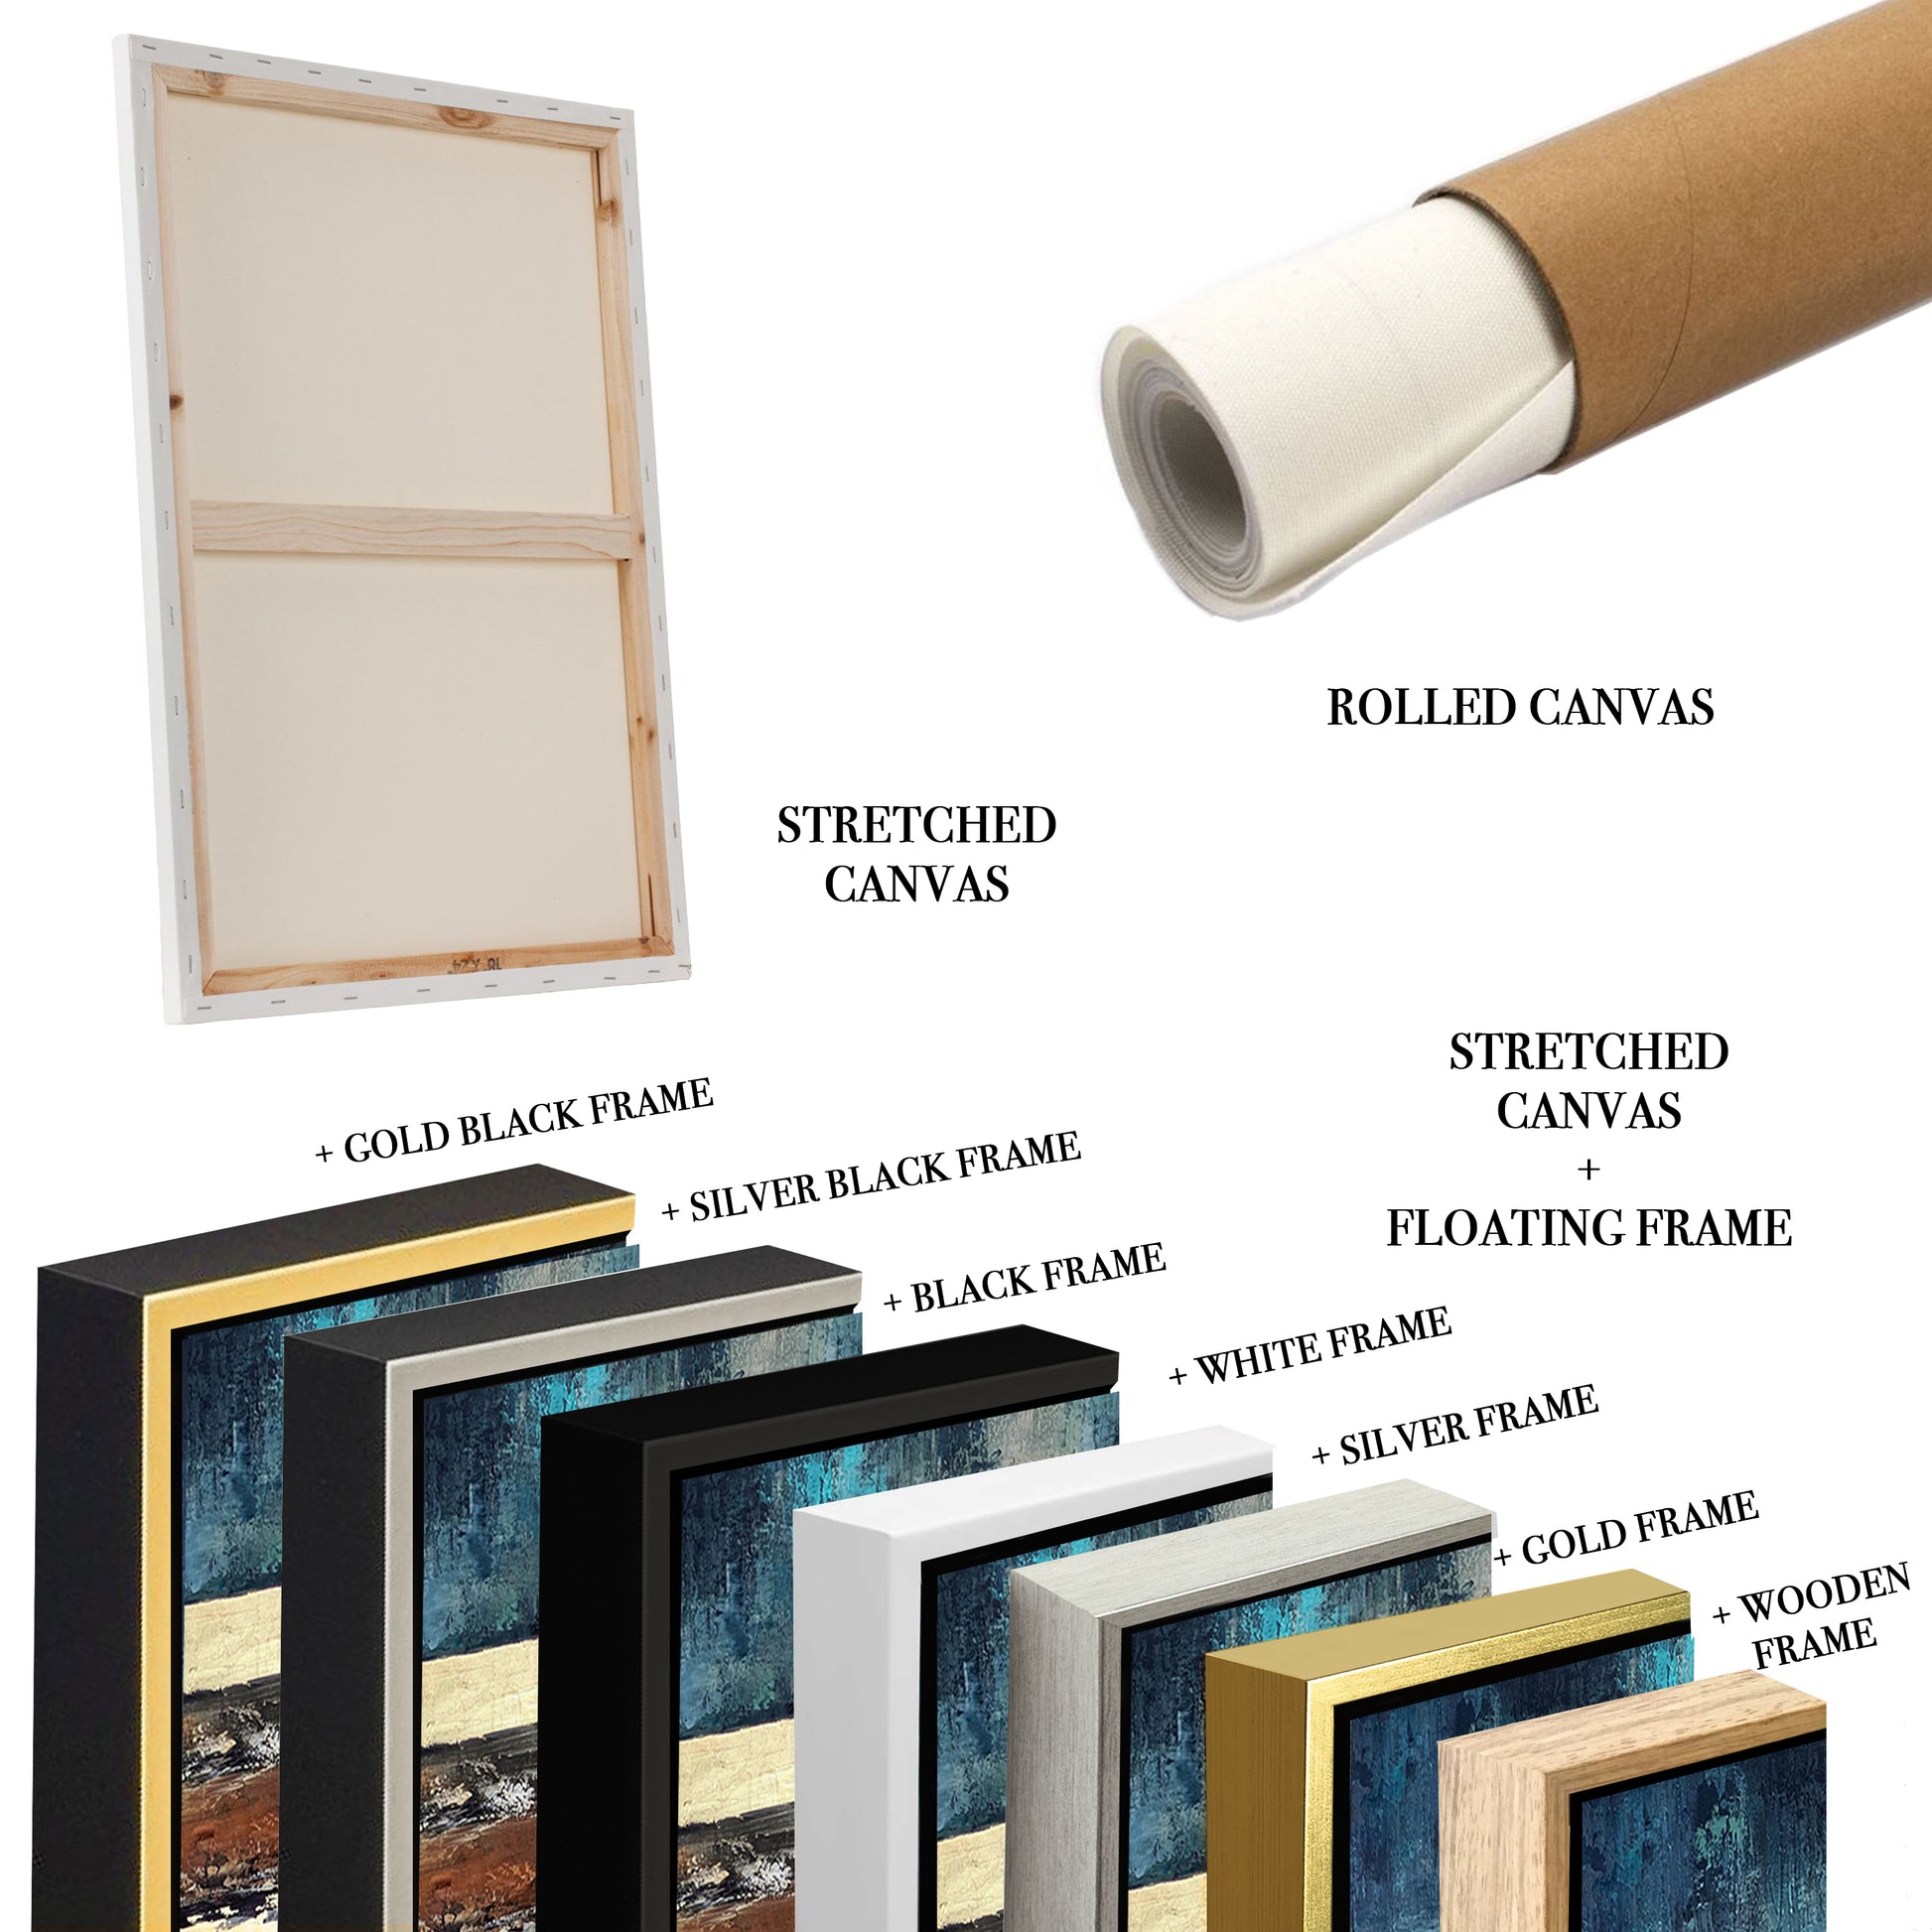 a picture frame, rolled canvas, rolled canvas, rolled canvas, rolled canvas,